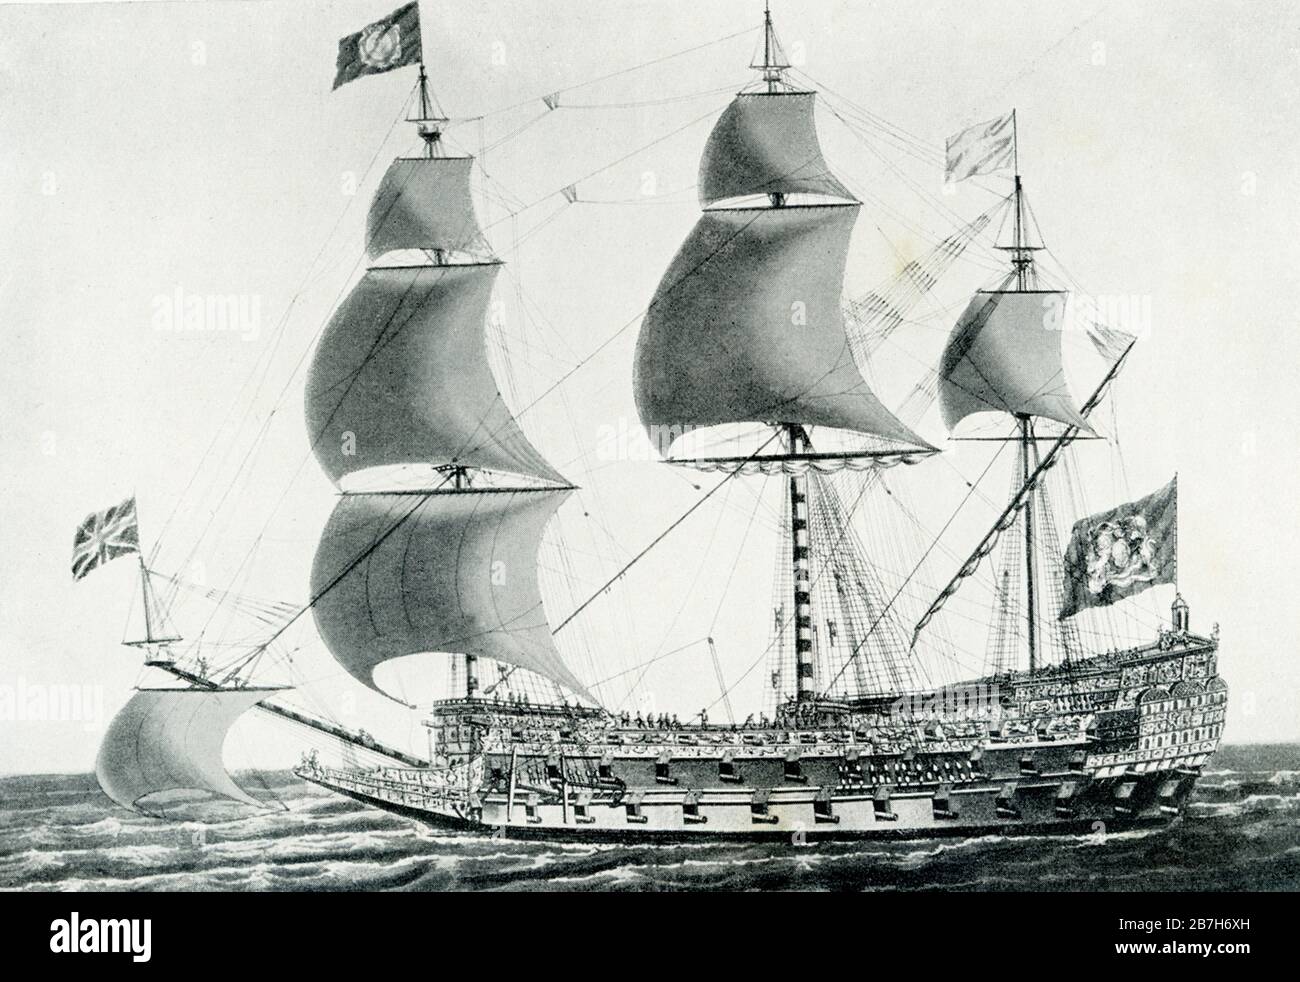 This image of the Sovereign of the Seas, which was built in 1607, dates to the early 1900s. Sovereign of the Seas was a 17th-century warship of the English Navy. She was ordered as a 90-gun first-rate ship of the line of the English Royal Navy, but at launch was armed with 102 bronze guns at the insistence of the king, Charles I. It was later renamed Sovereign, and then Royal Sovereign. Stock Photo